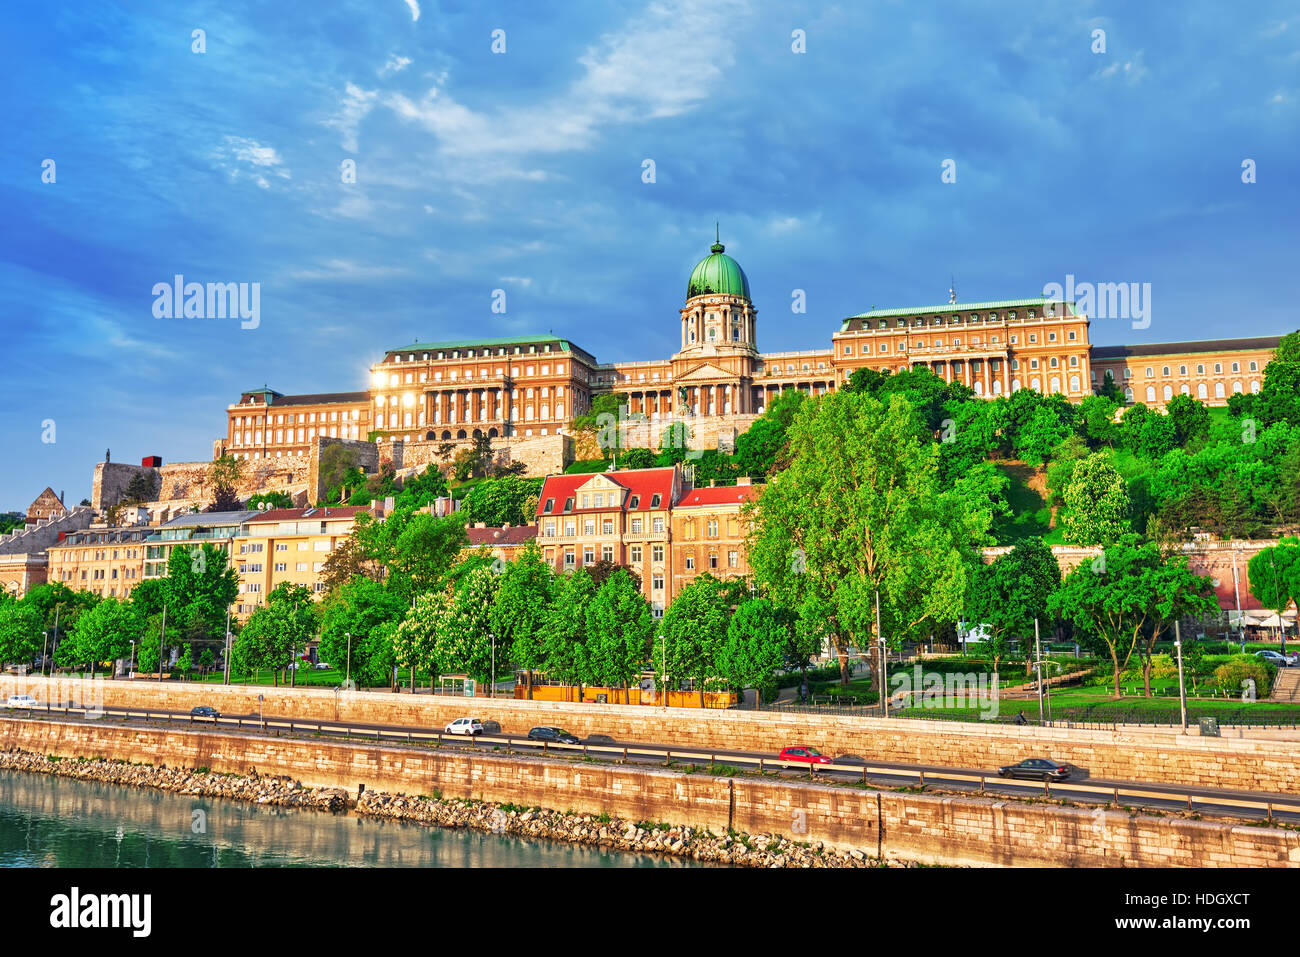 Budapest Royal Castle at morning time. Stock Photo